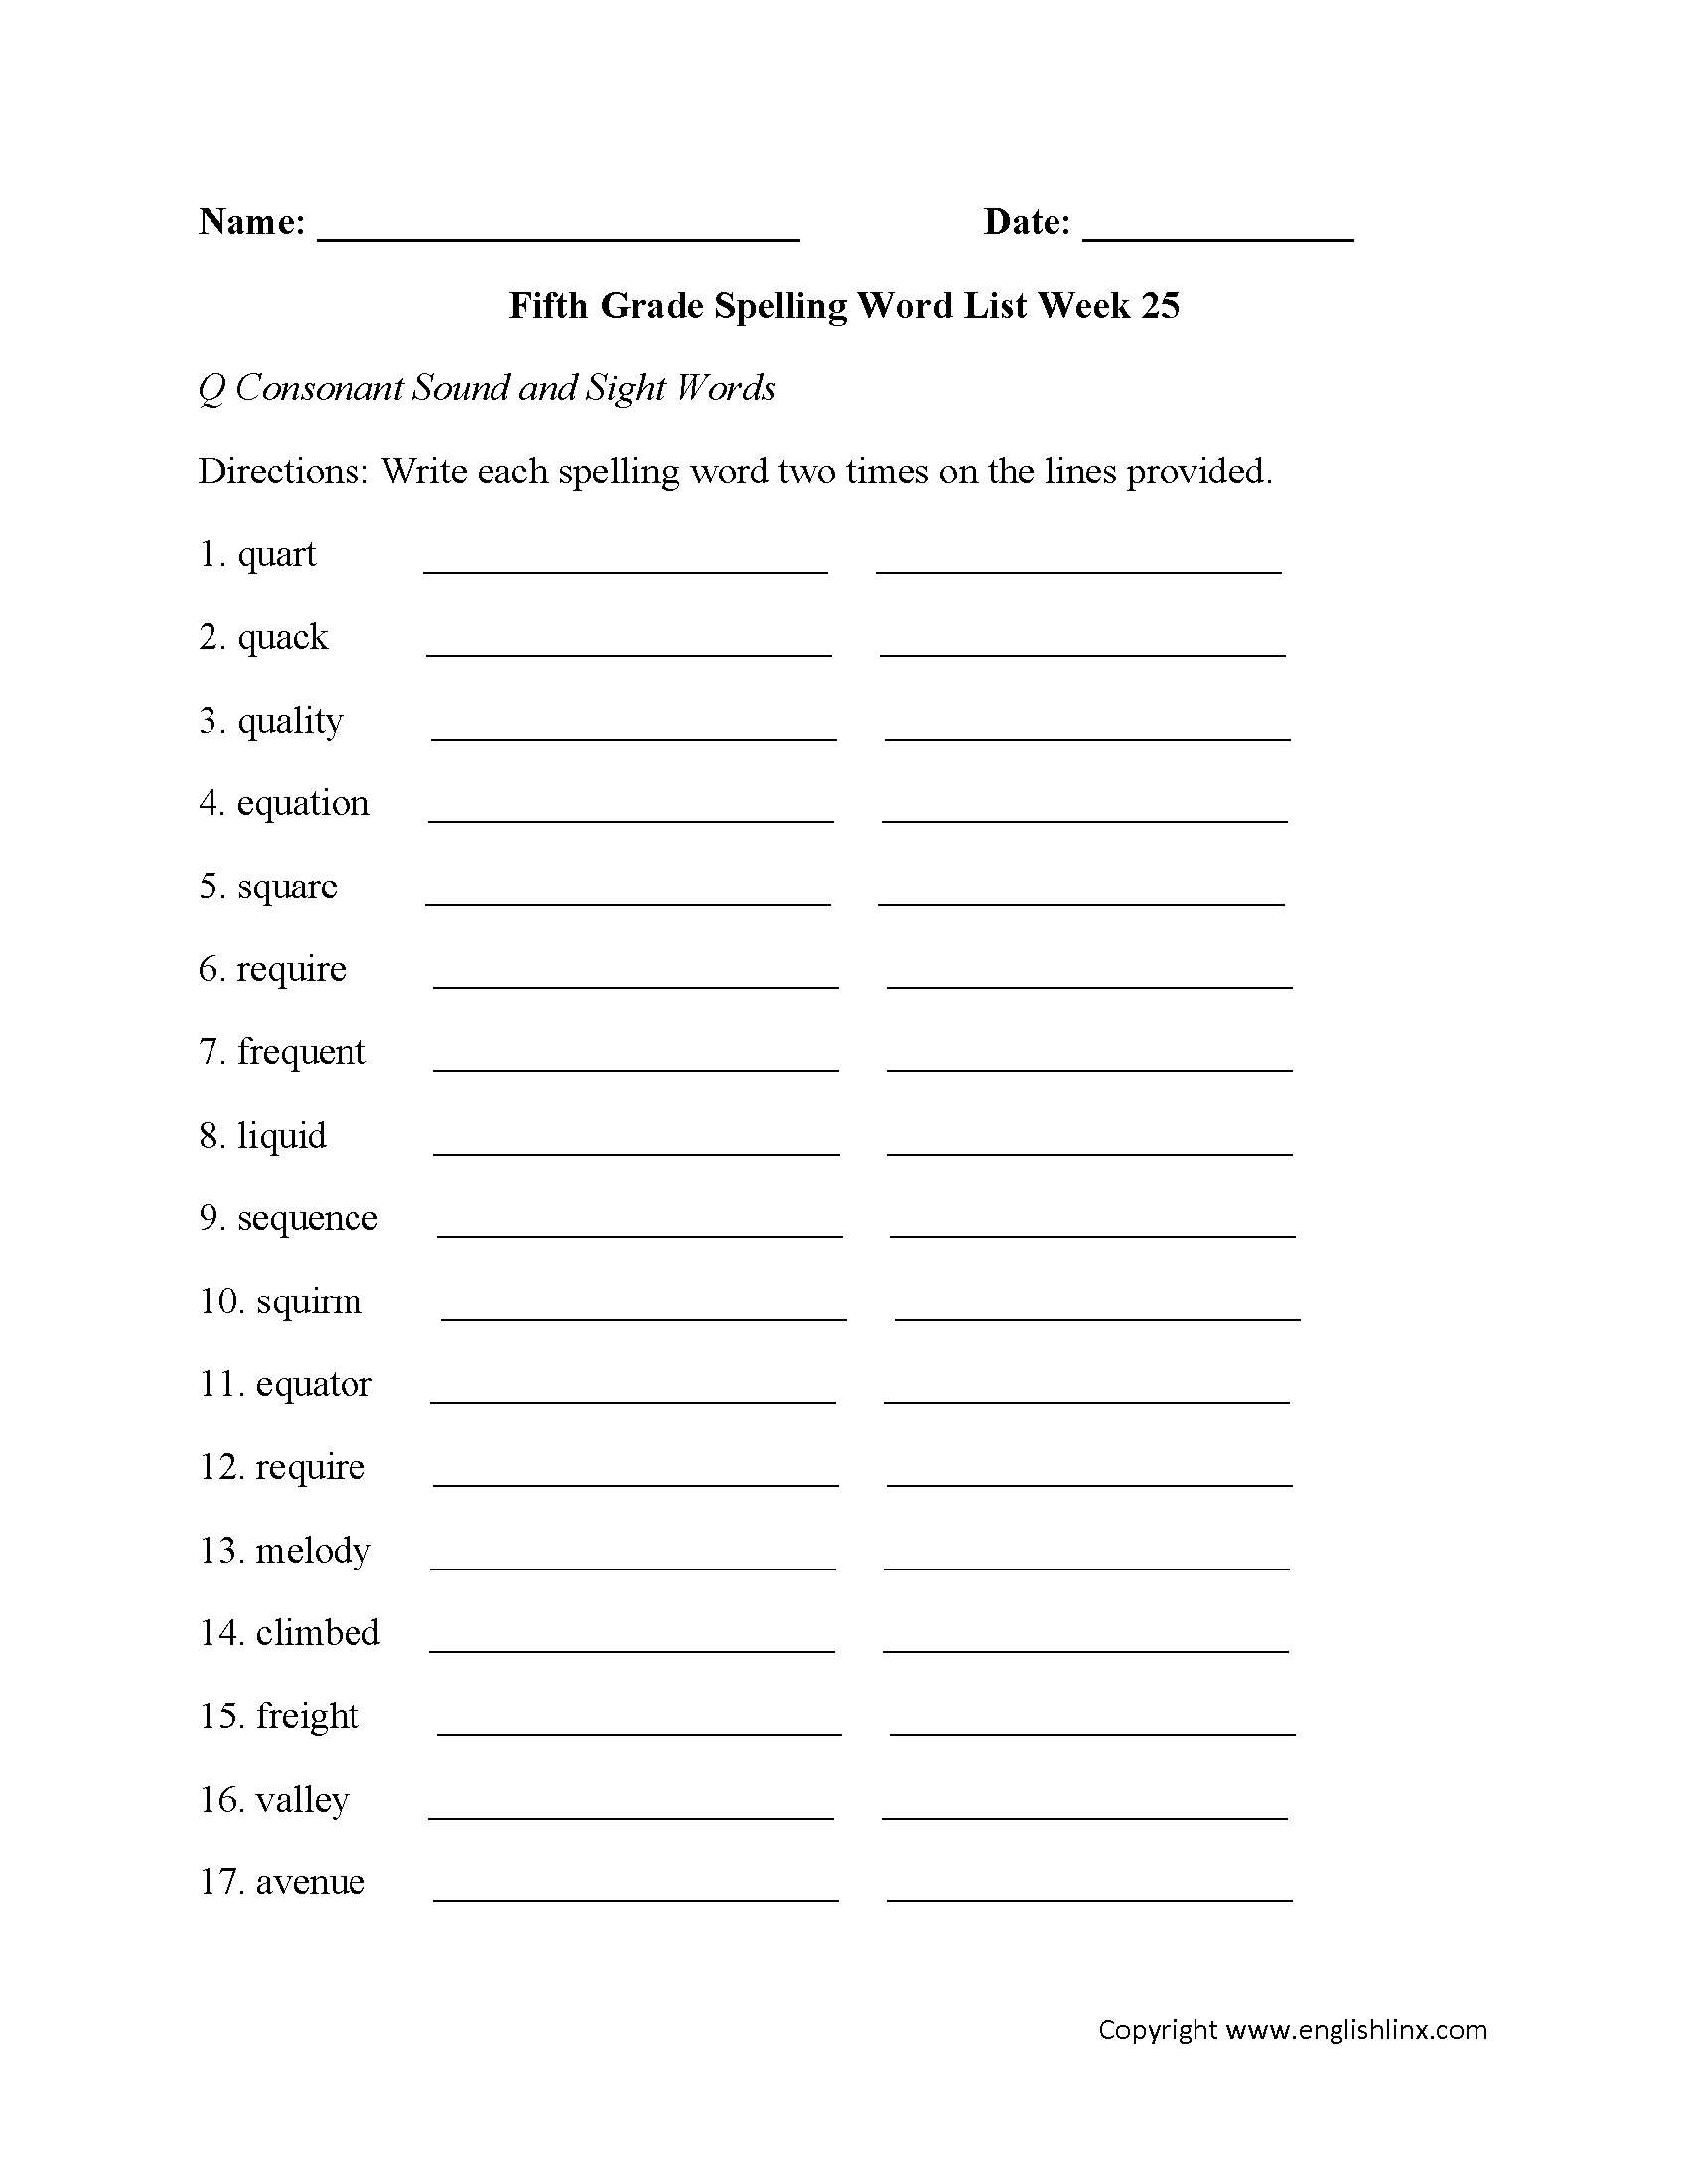 Week 25 Q Consonant and Sight Words Fifth Grade Spelling Words Worksheets